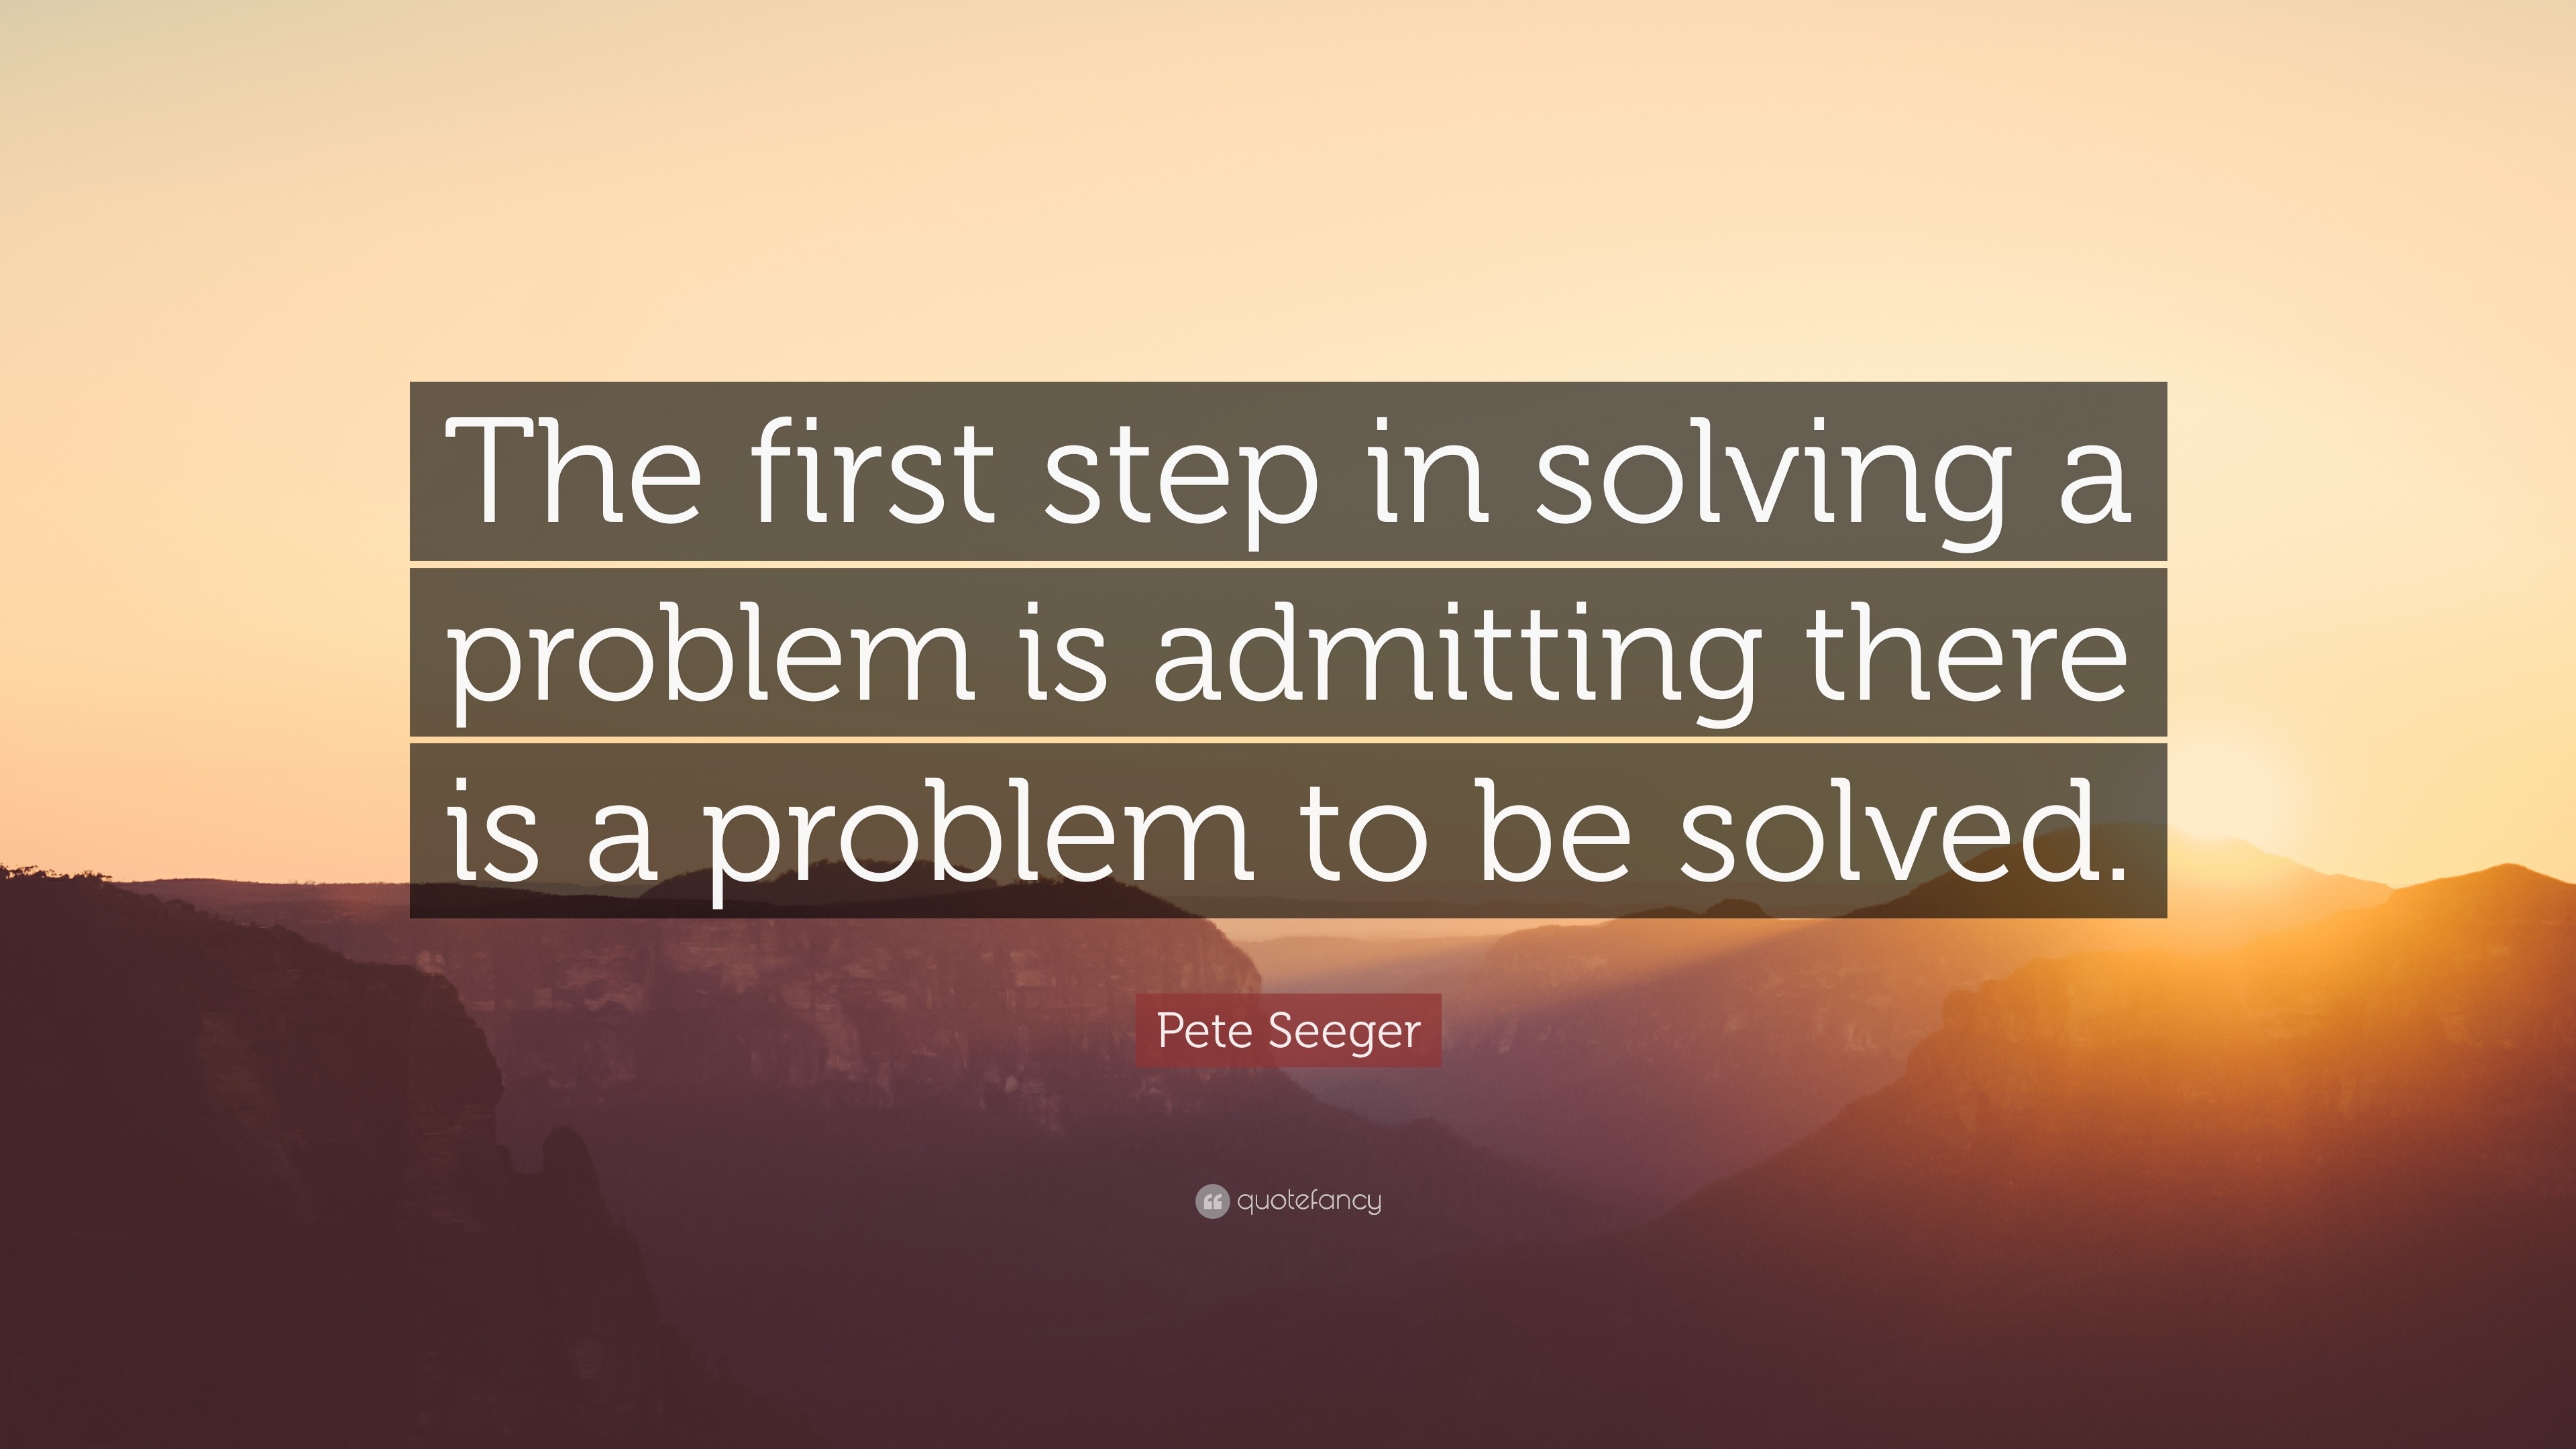 what was the first step in problem solving